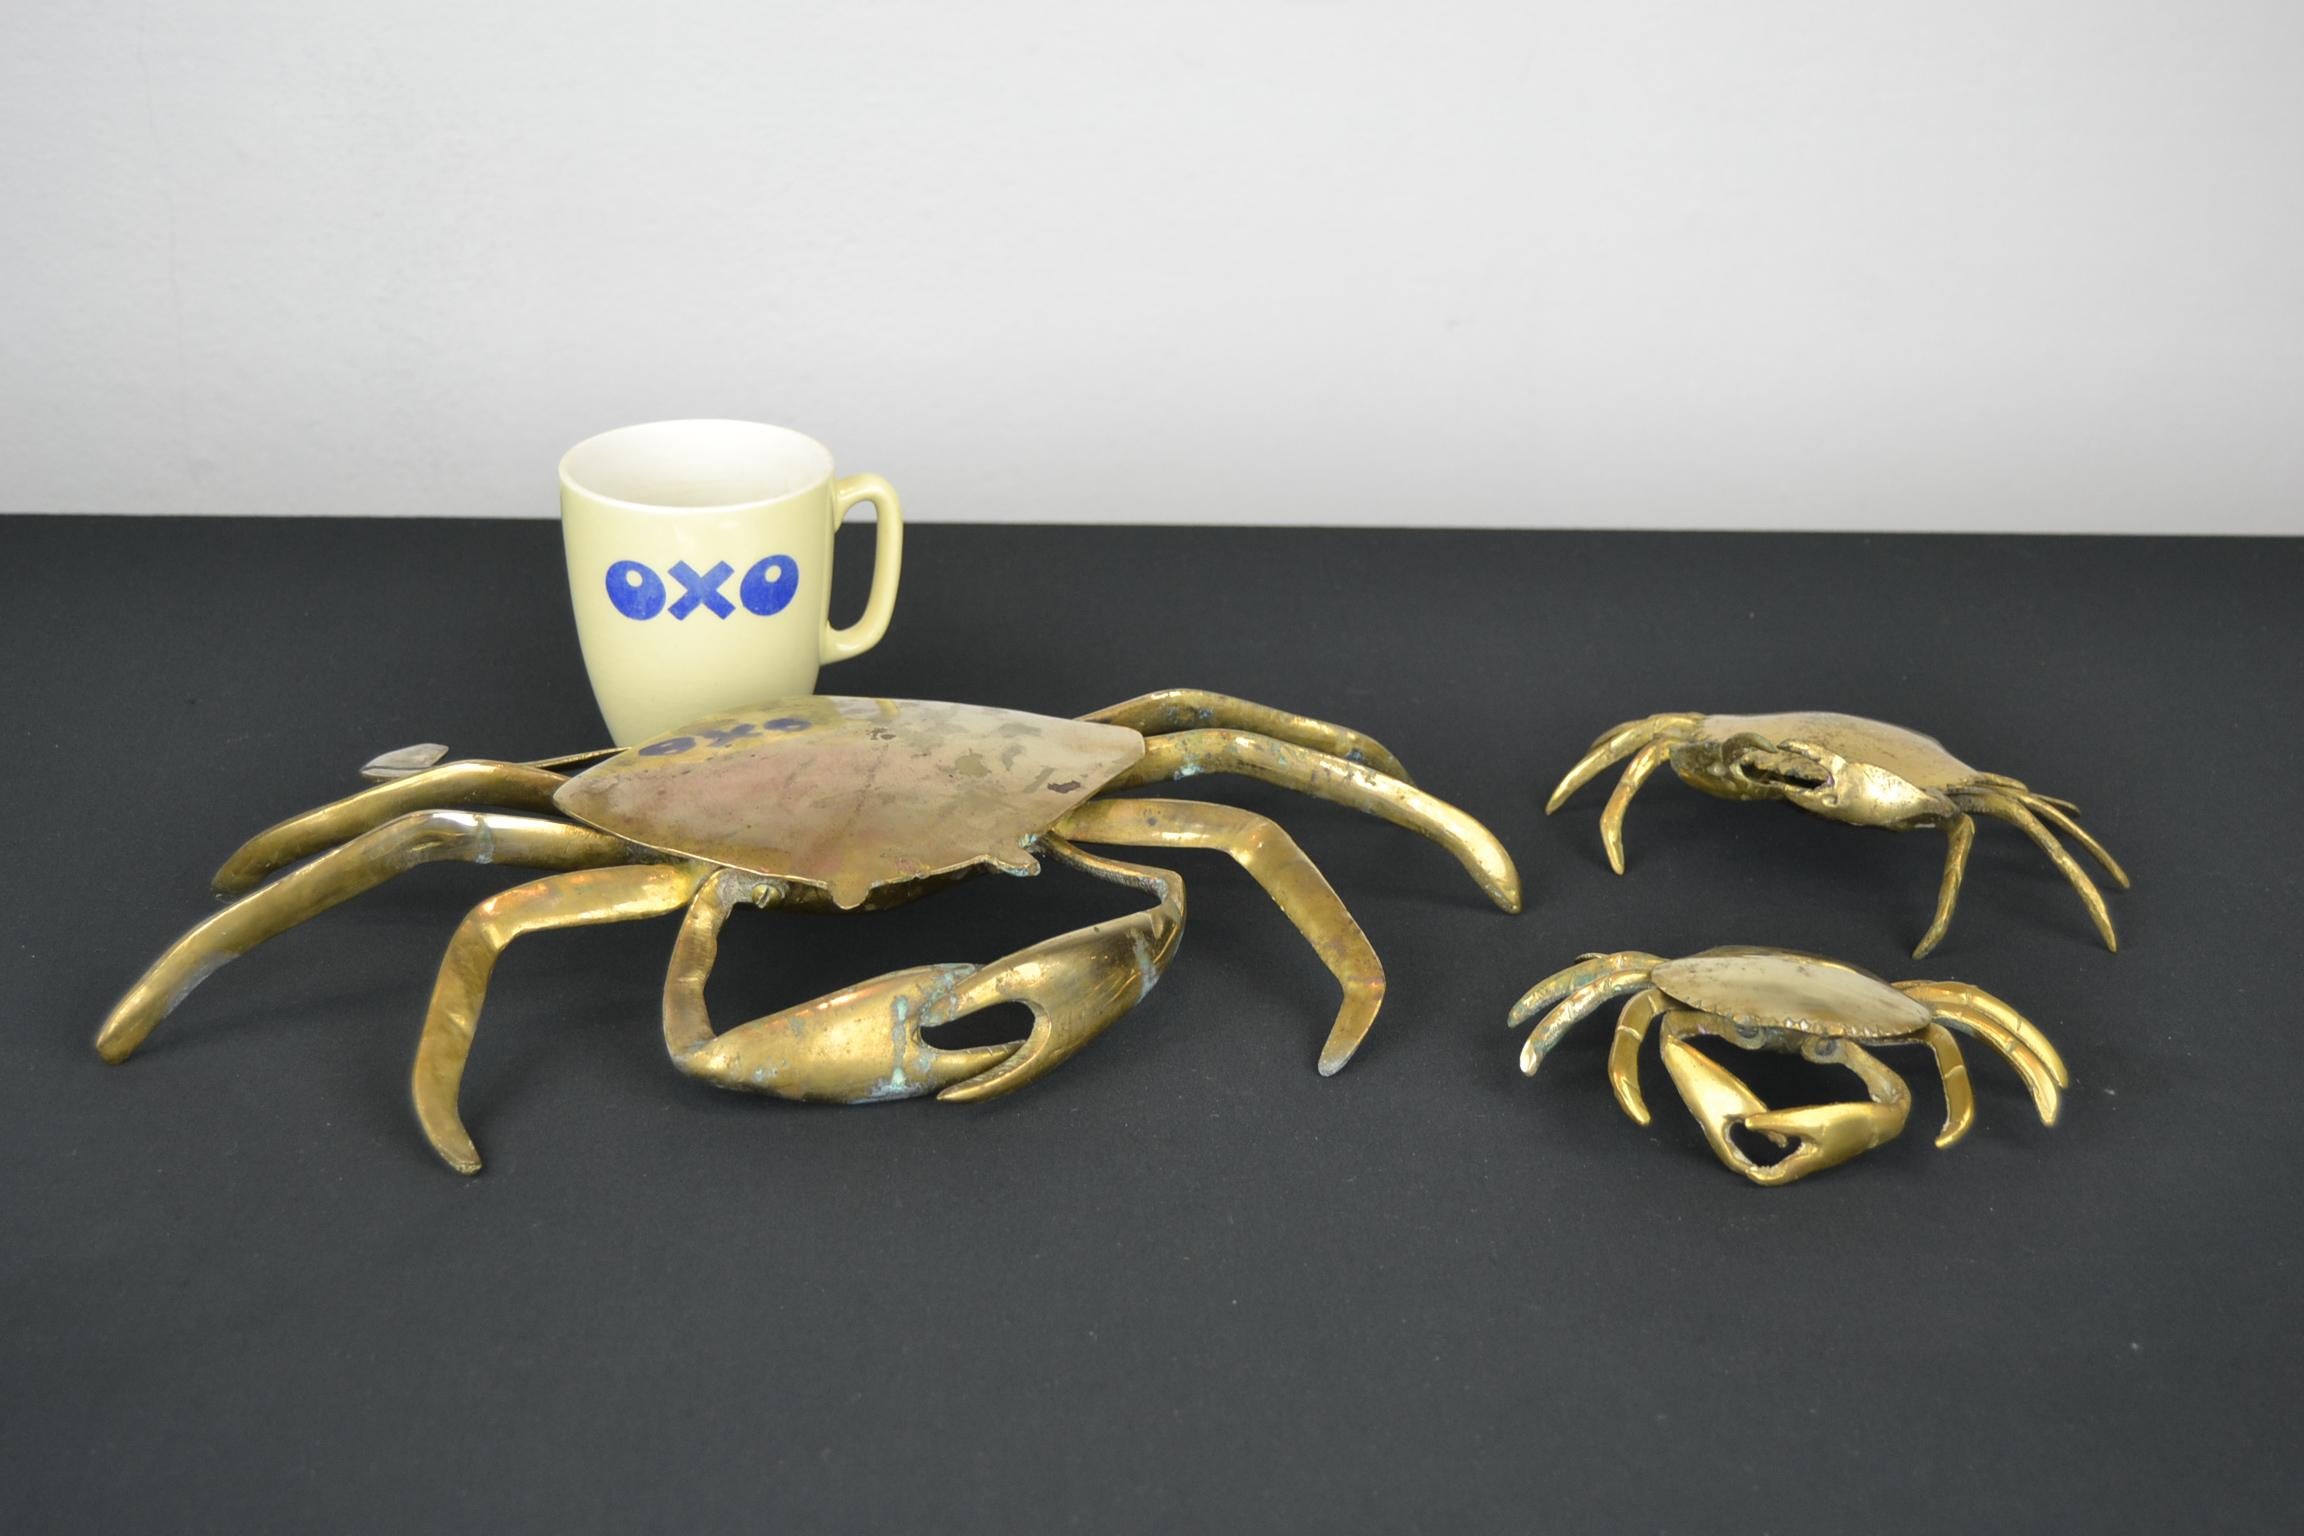 Set of 3 vintage brass crab sculptures.
These life-size copper crab animal trinket boxes date from the late 1960s-1970s. They all have a lid which can be opened. These brass animal sculptures have a patina by age. We did not polish the brass, so